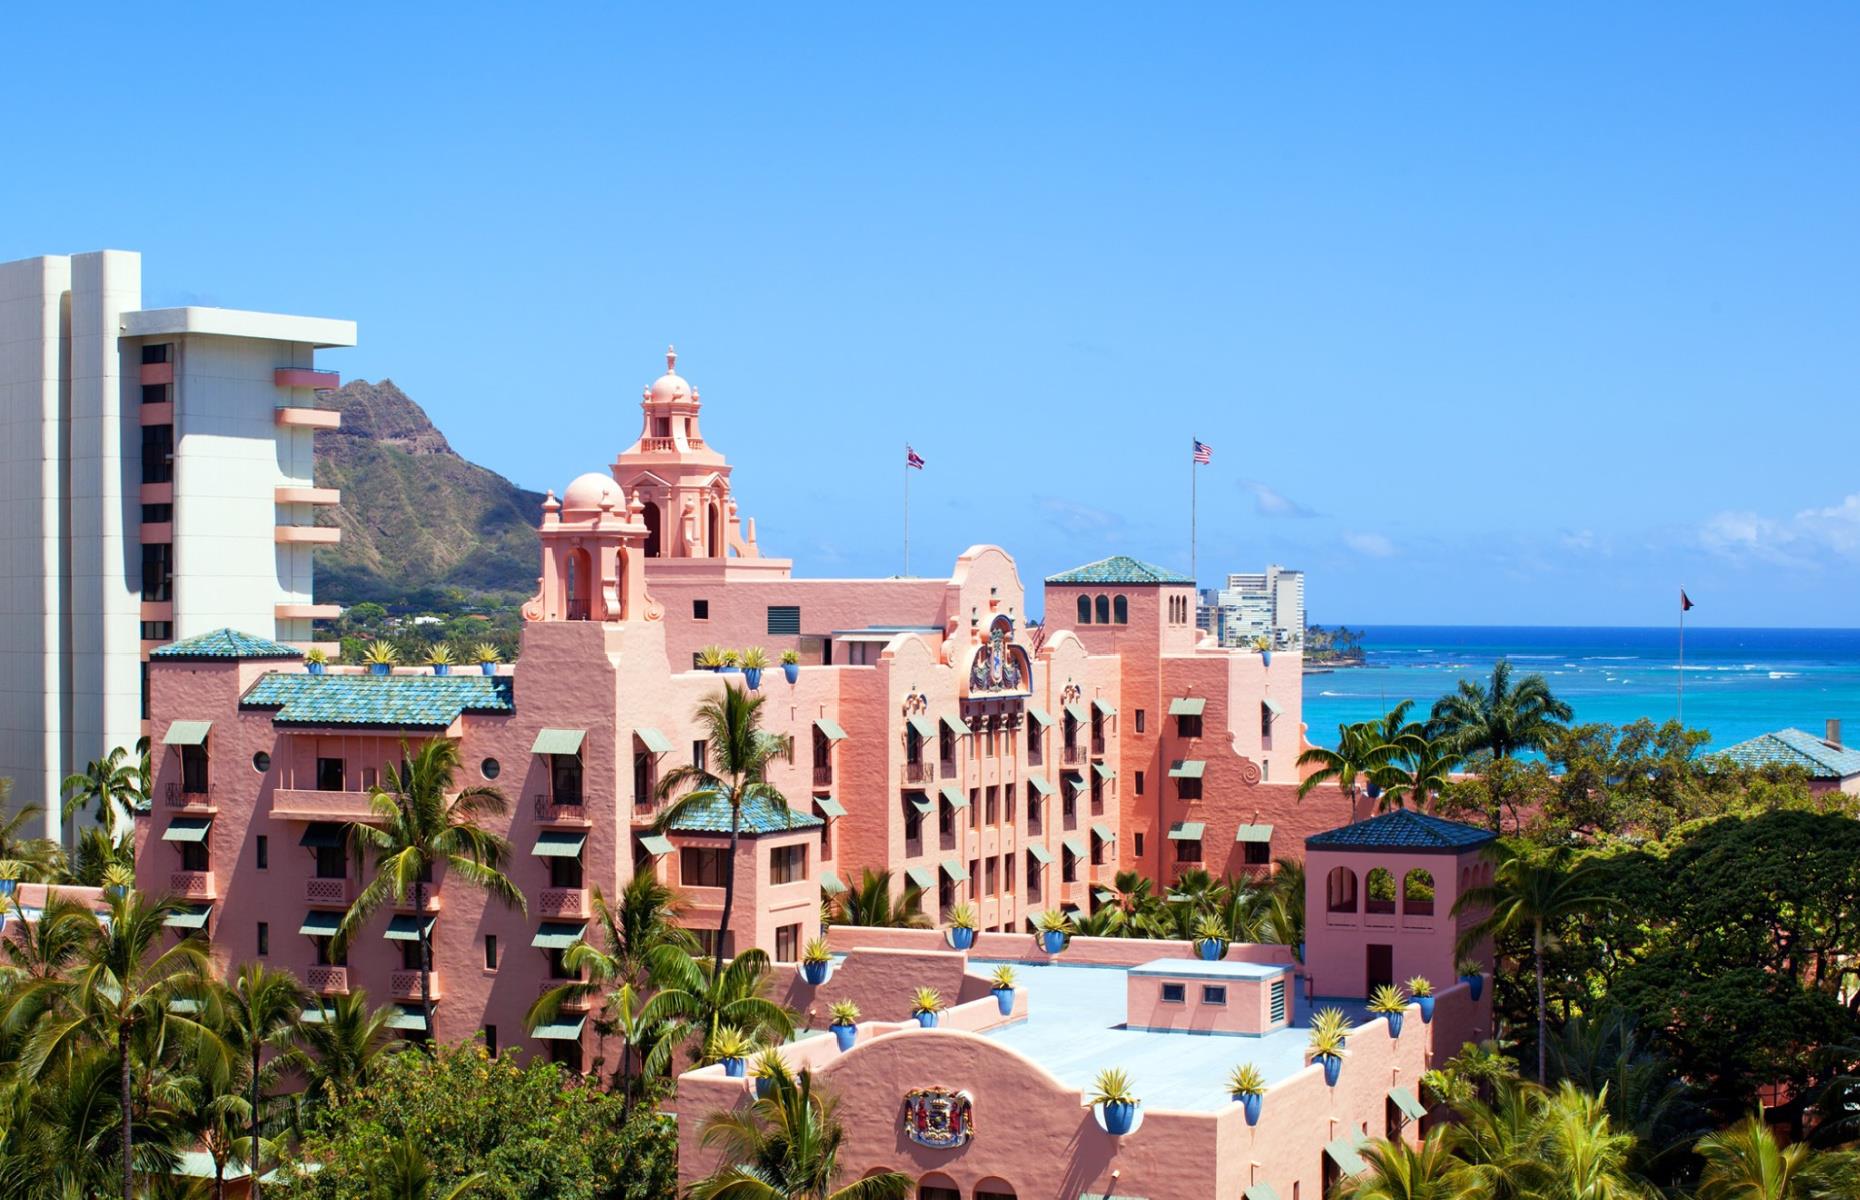 <p>While Hawaii has its share of ultra-modern resorts, there’s something magical about the nostalgic charm of this Waikiki resort. Known as the Pink Palace, <a href="https://www.royal-hawaiian.com/">The Royal Hawaiian</a> has been a top vacation destination for almost 100 years for good reason. The lavishly-decorated rooms, postcard-worthy pools and weekly luau dinners make it a jewel of Hawaii’s most legendary beach.</p>